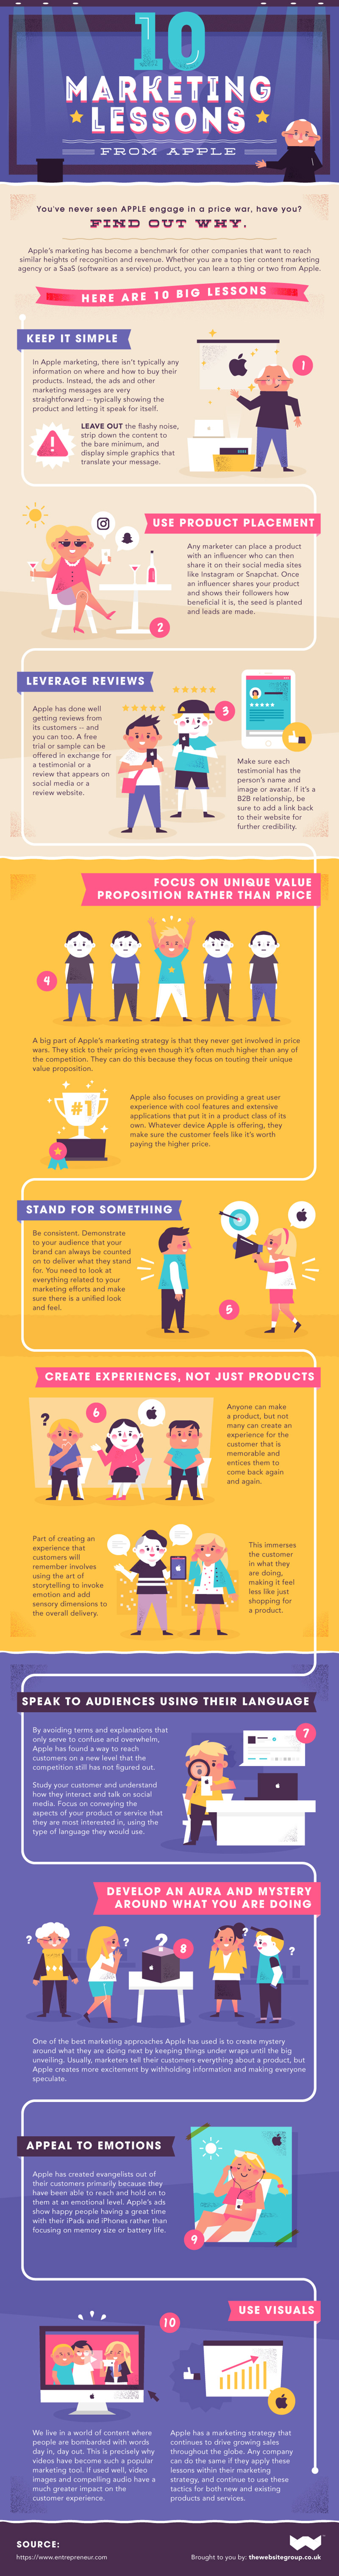 10 Marketing Lessons from Apple Infographic 10 Marketing Lessons from Apple